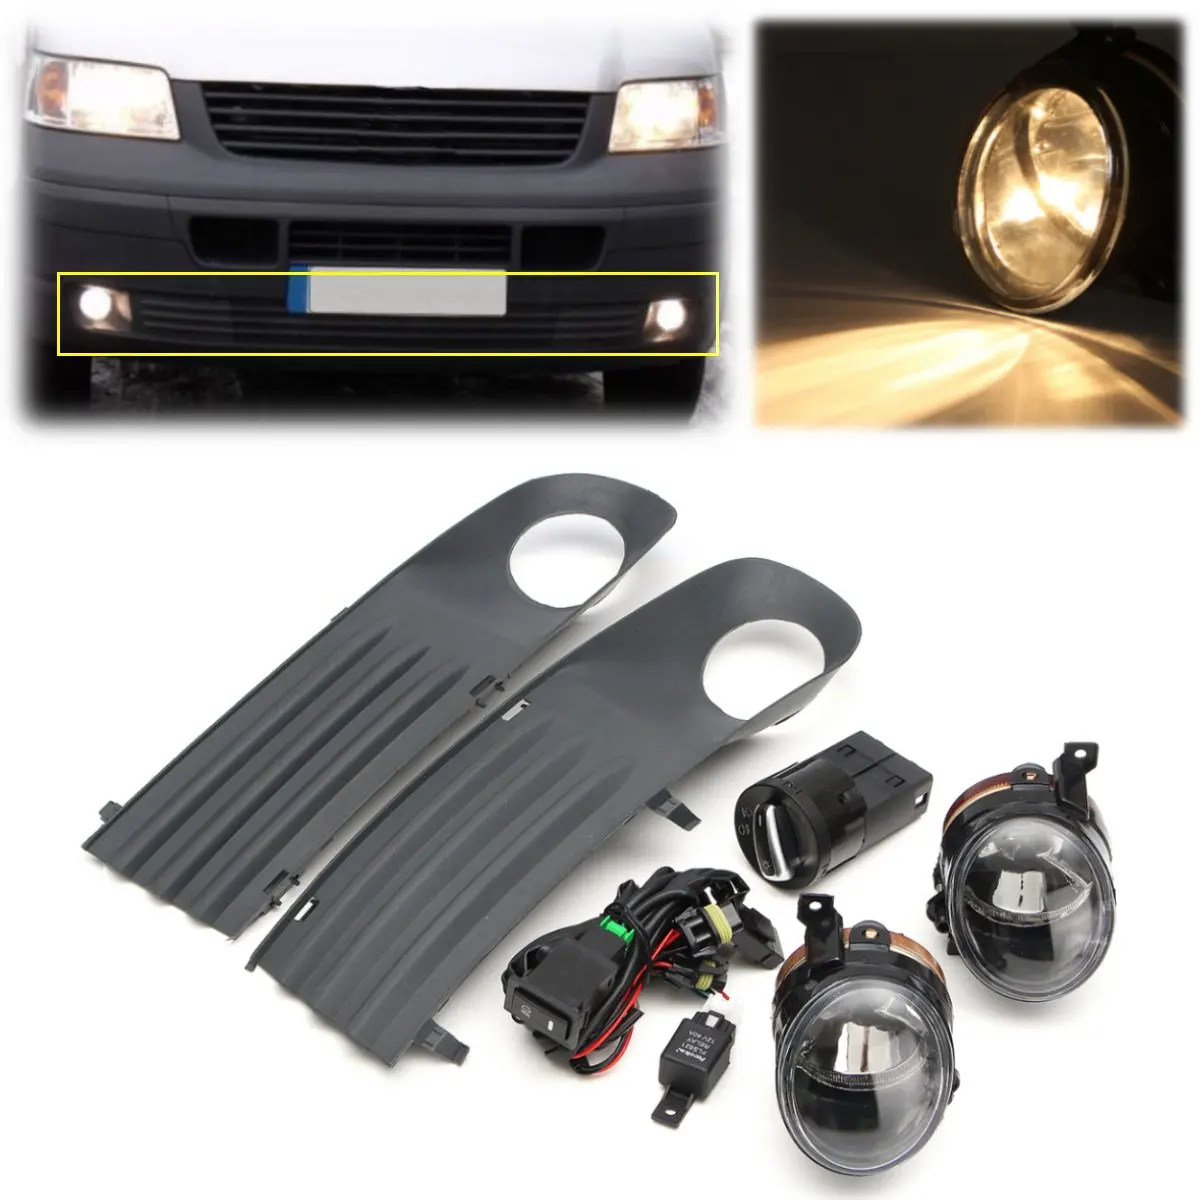 55W Front Left Right Foglight Grille Kit Set w/ Wiring Headlight Switch For VW T5 TRANSPORTER 2003-2010